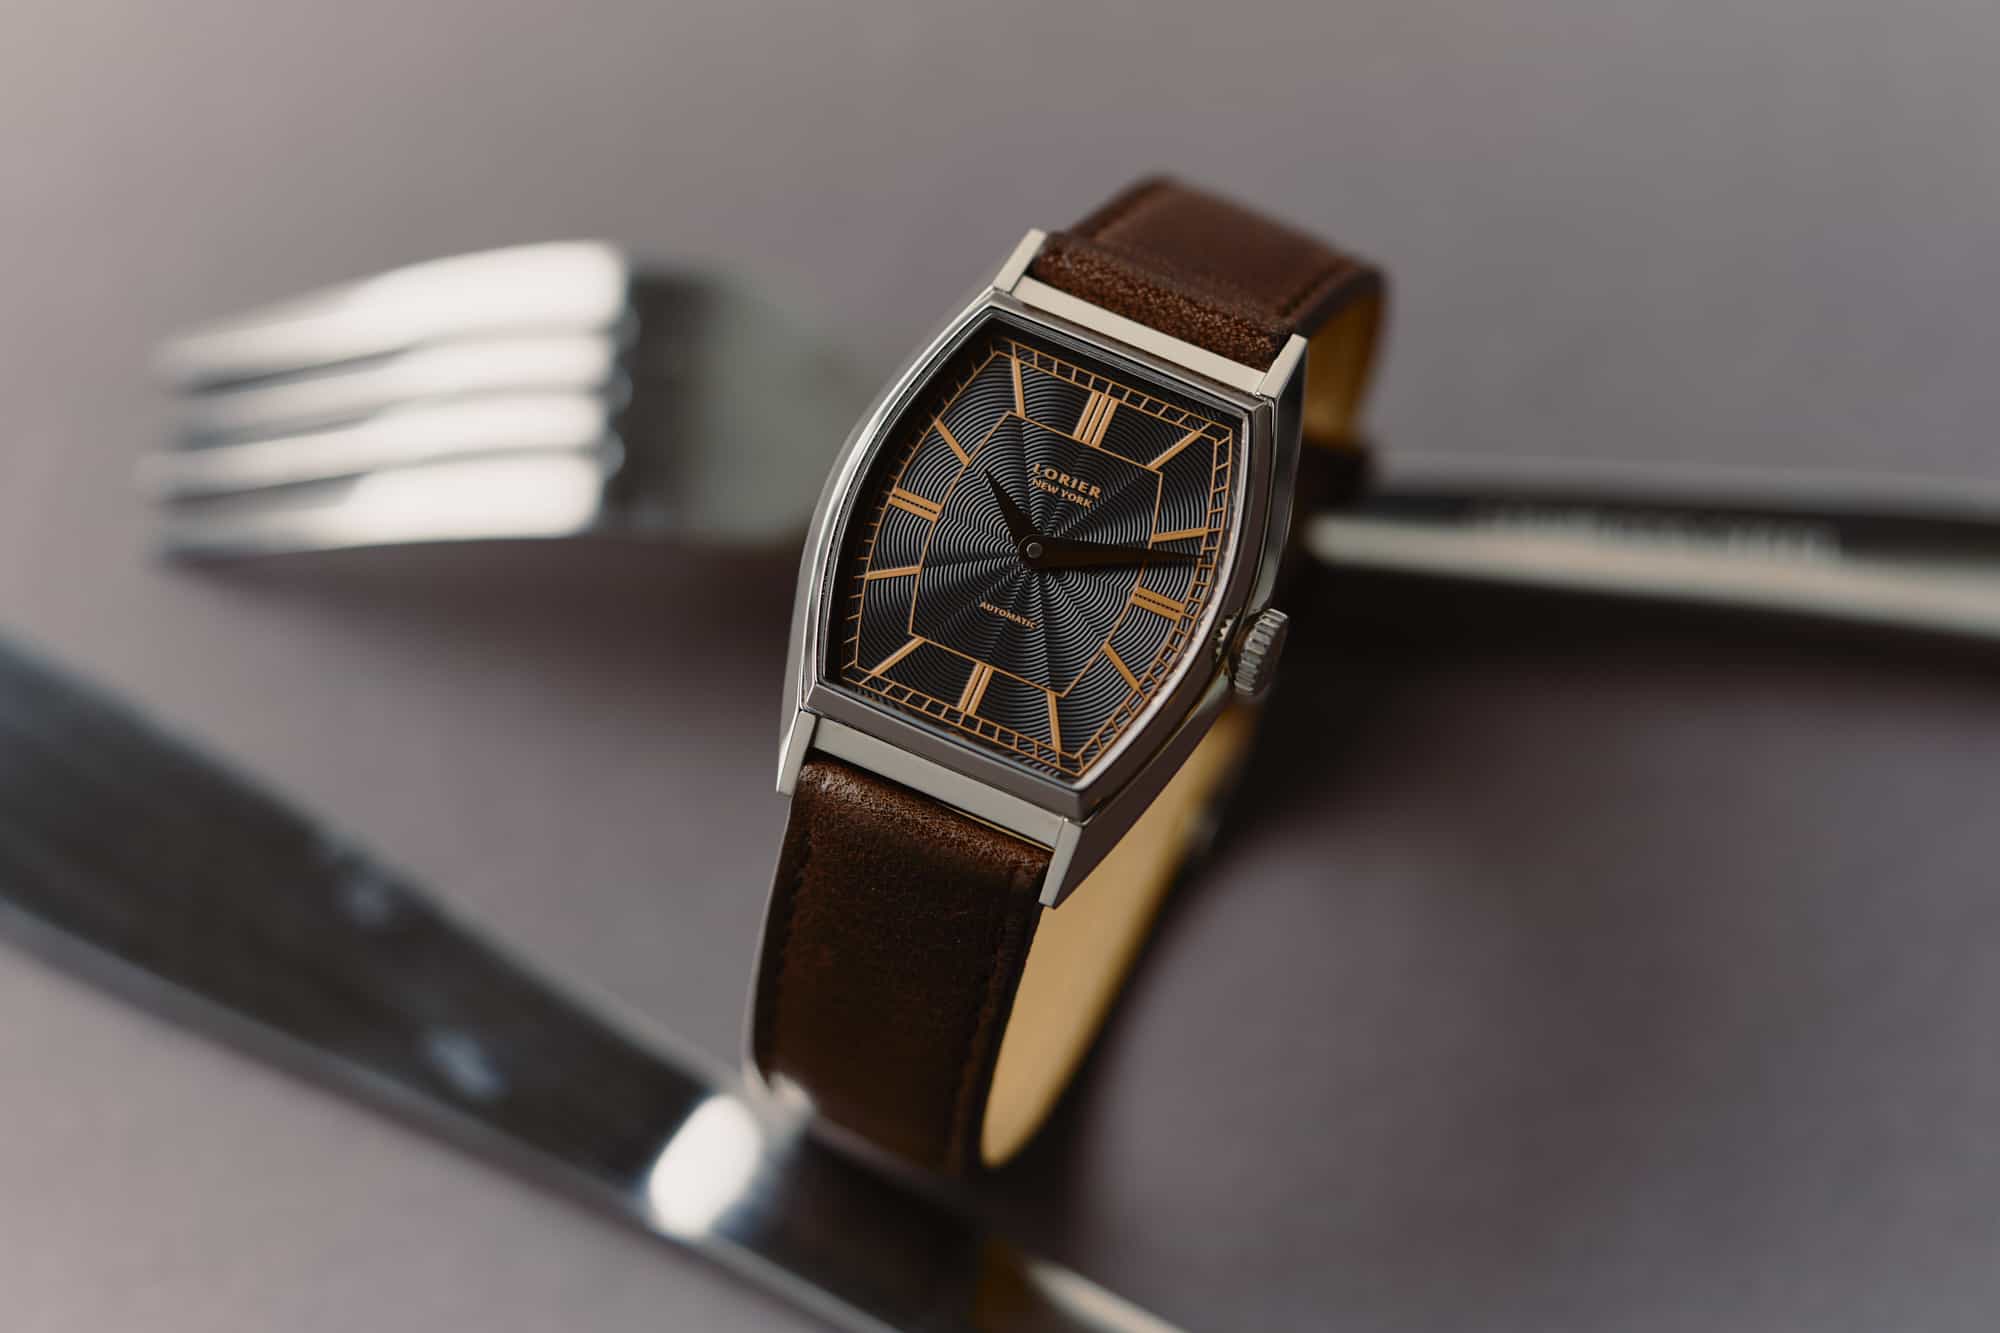 Hands-On: Get a Little Fancy with the Lorier Zephyr - Worn & Wound